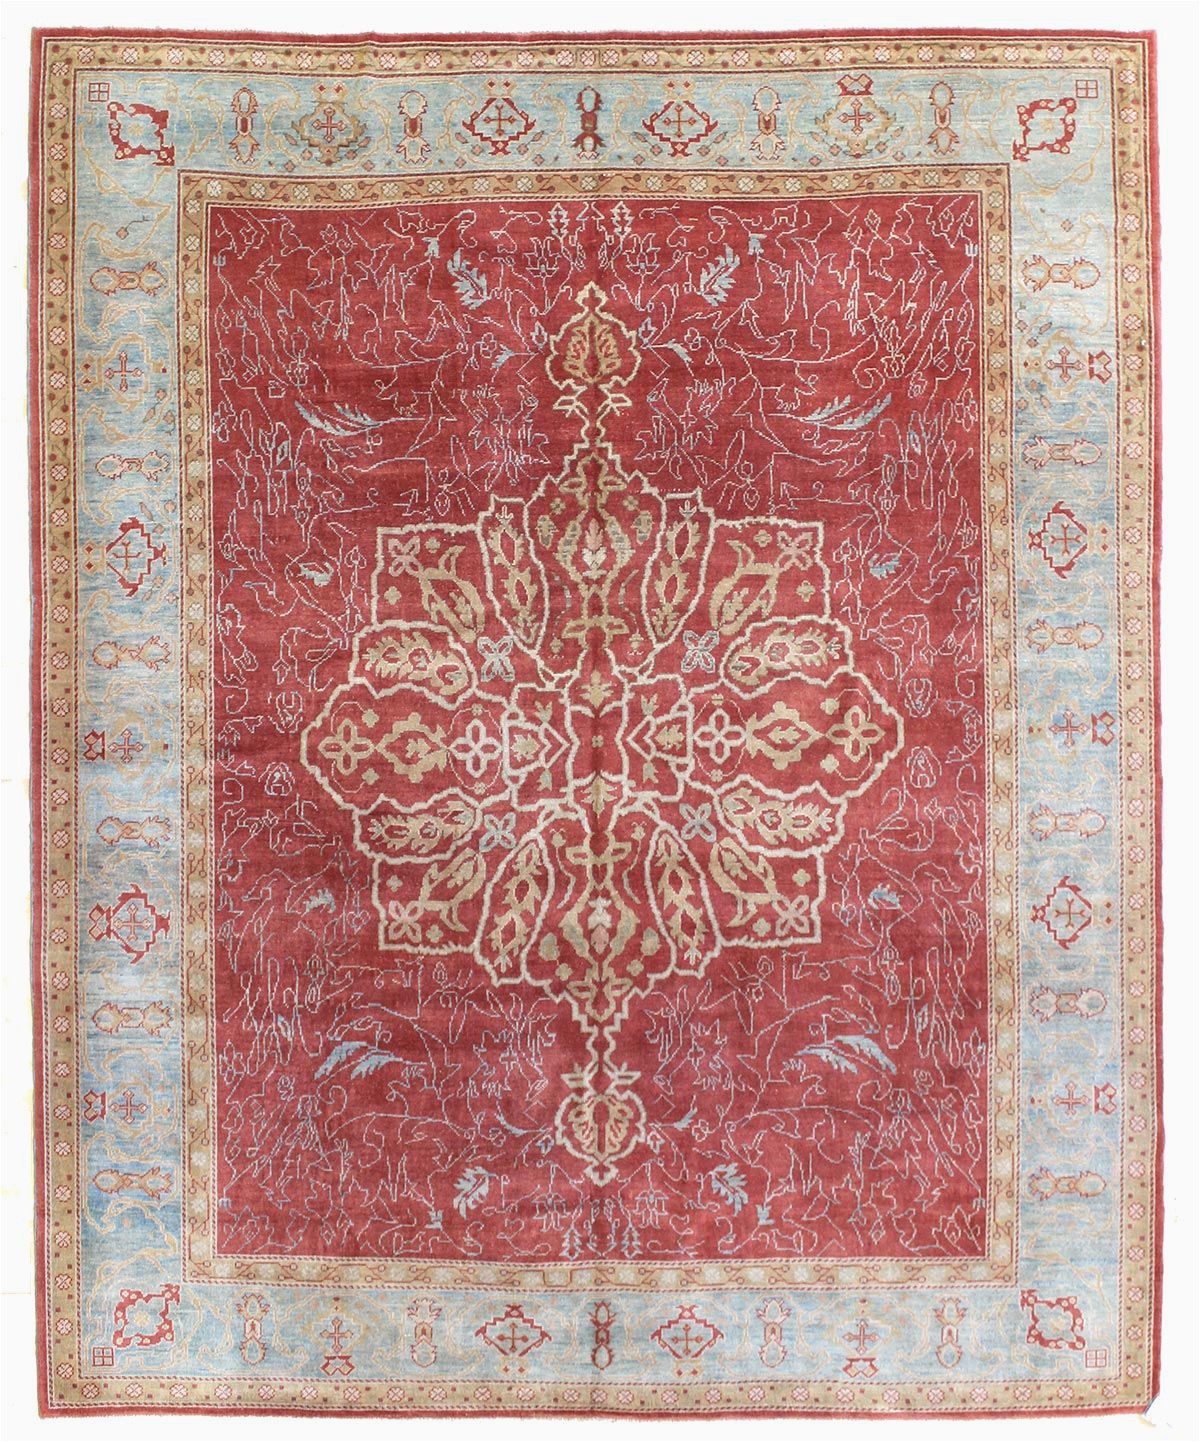 10 Feet by 12 Feet area Rugs Oushak Rugs Gallery Oushak Rug Hand Knotted In Turkey